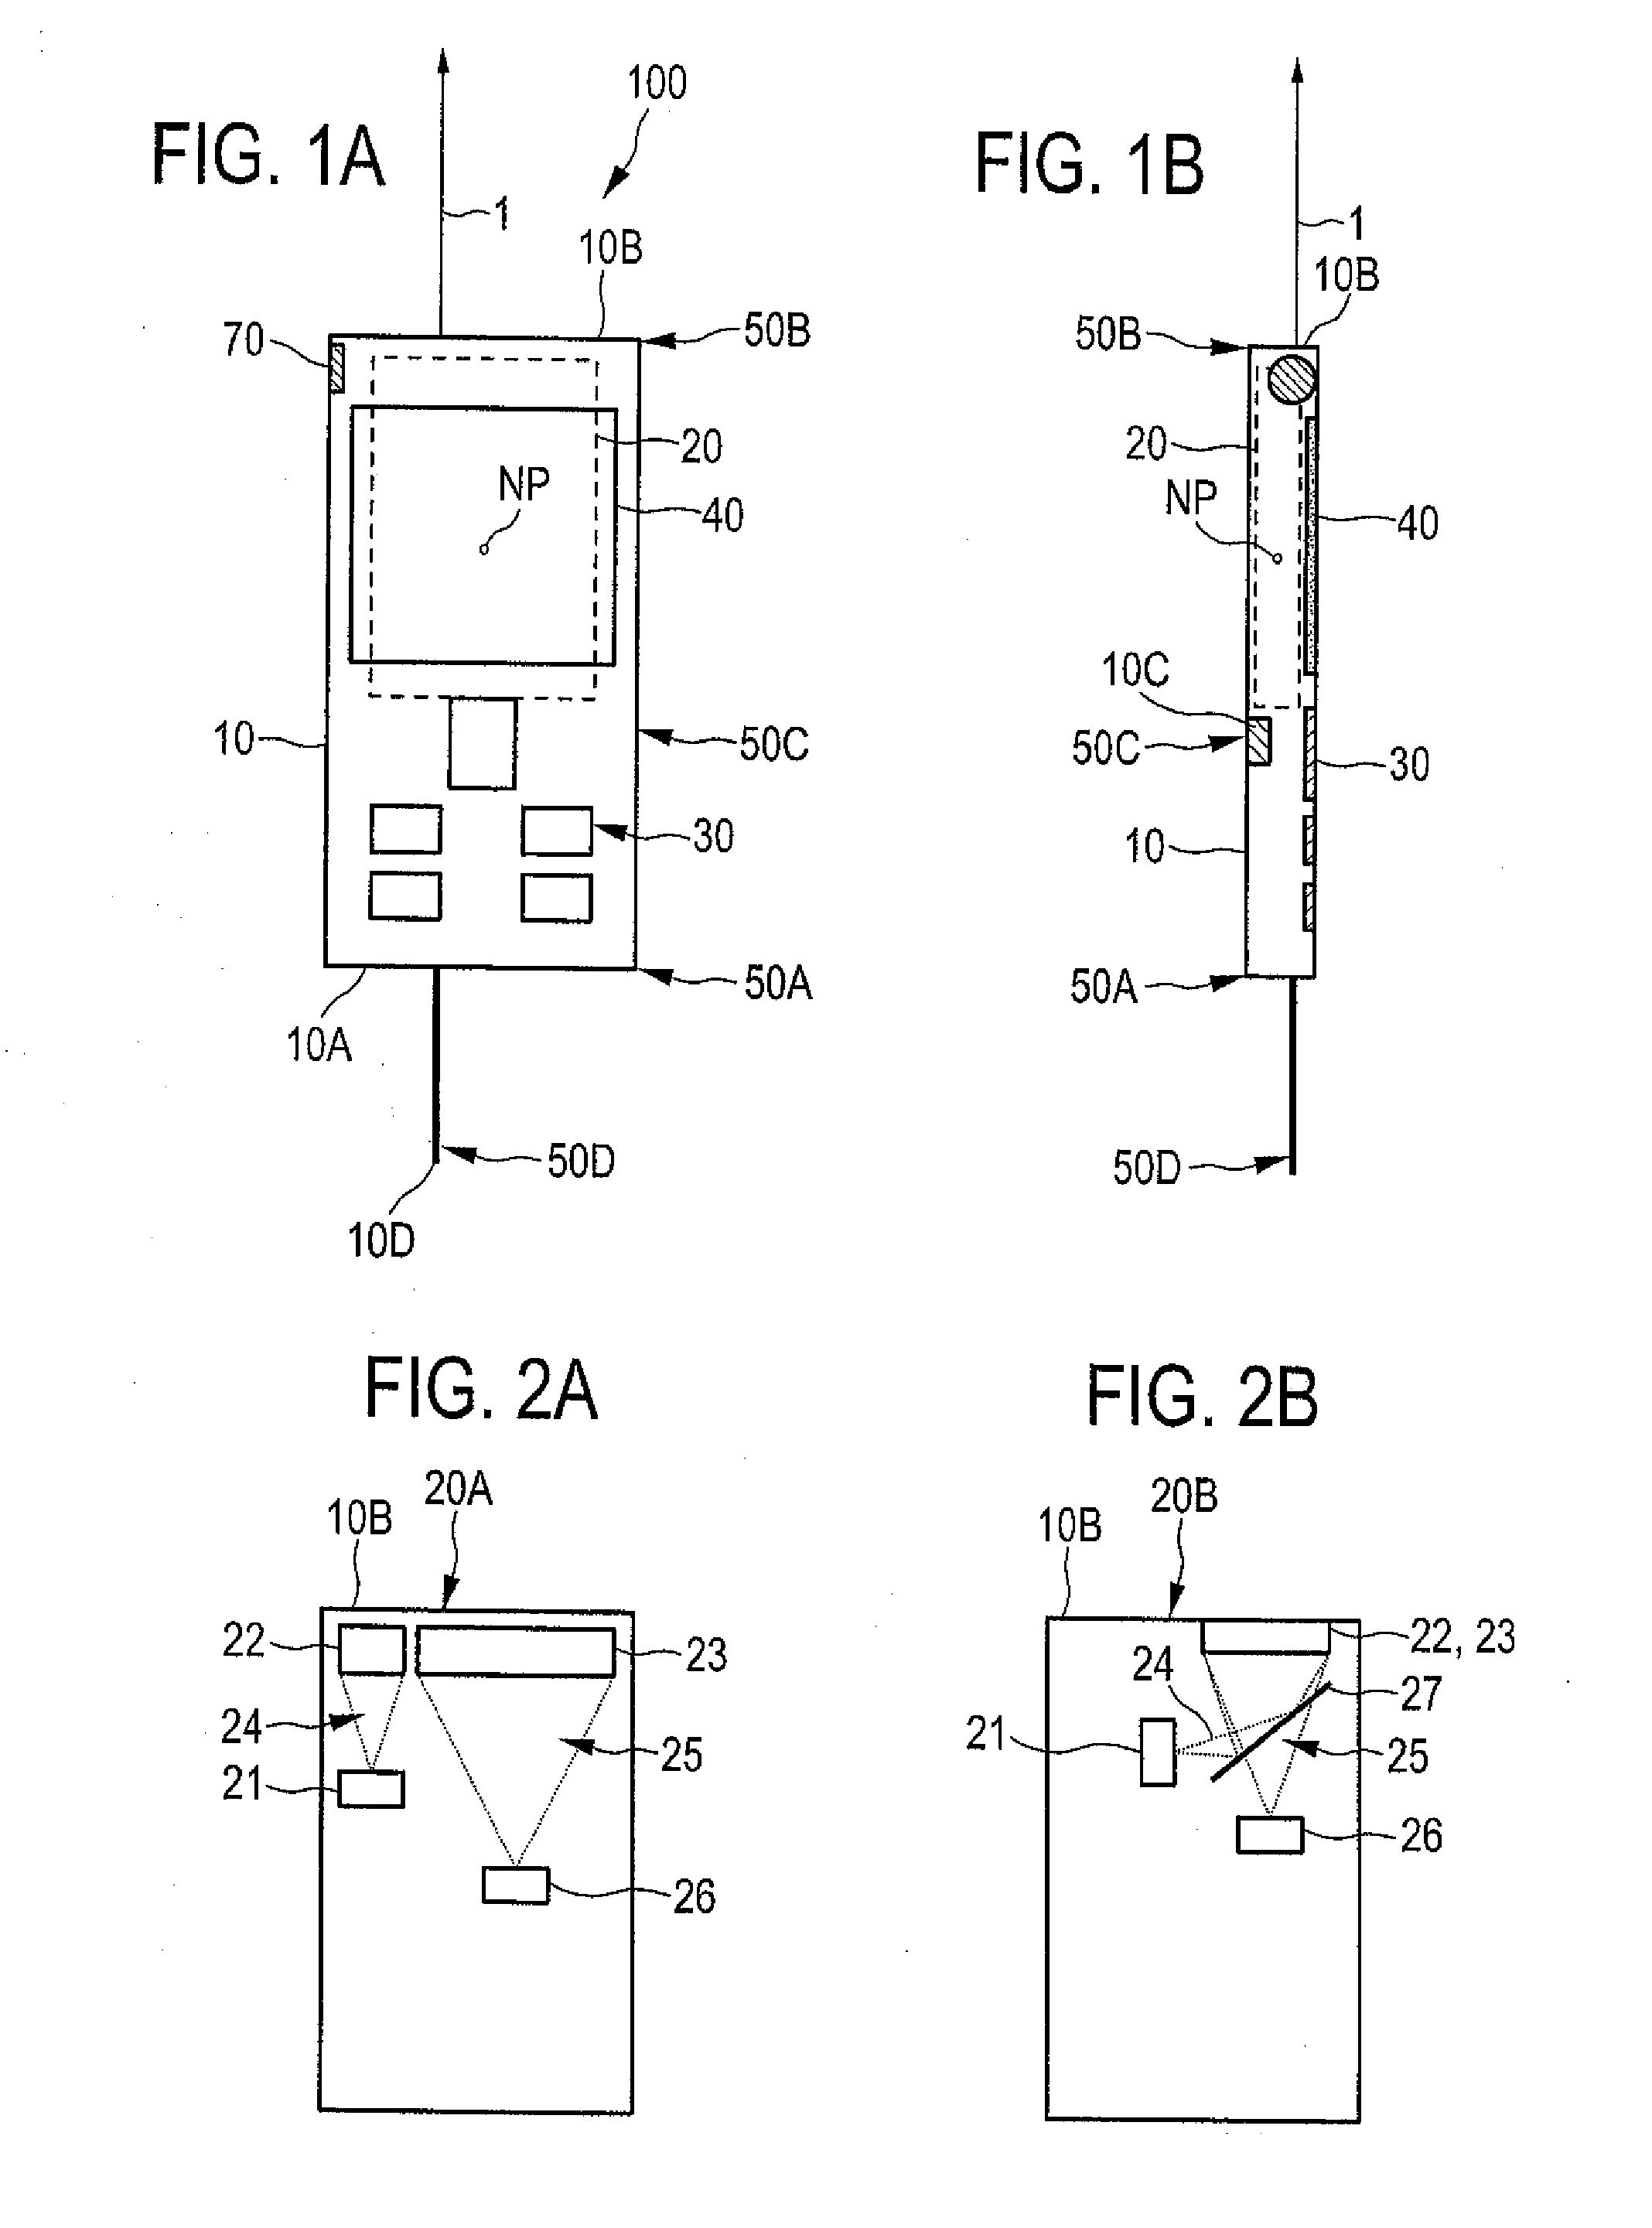 Measuring device for noncontact measurement of distances to a target object